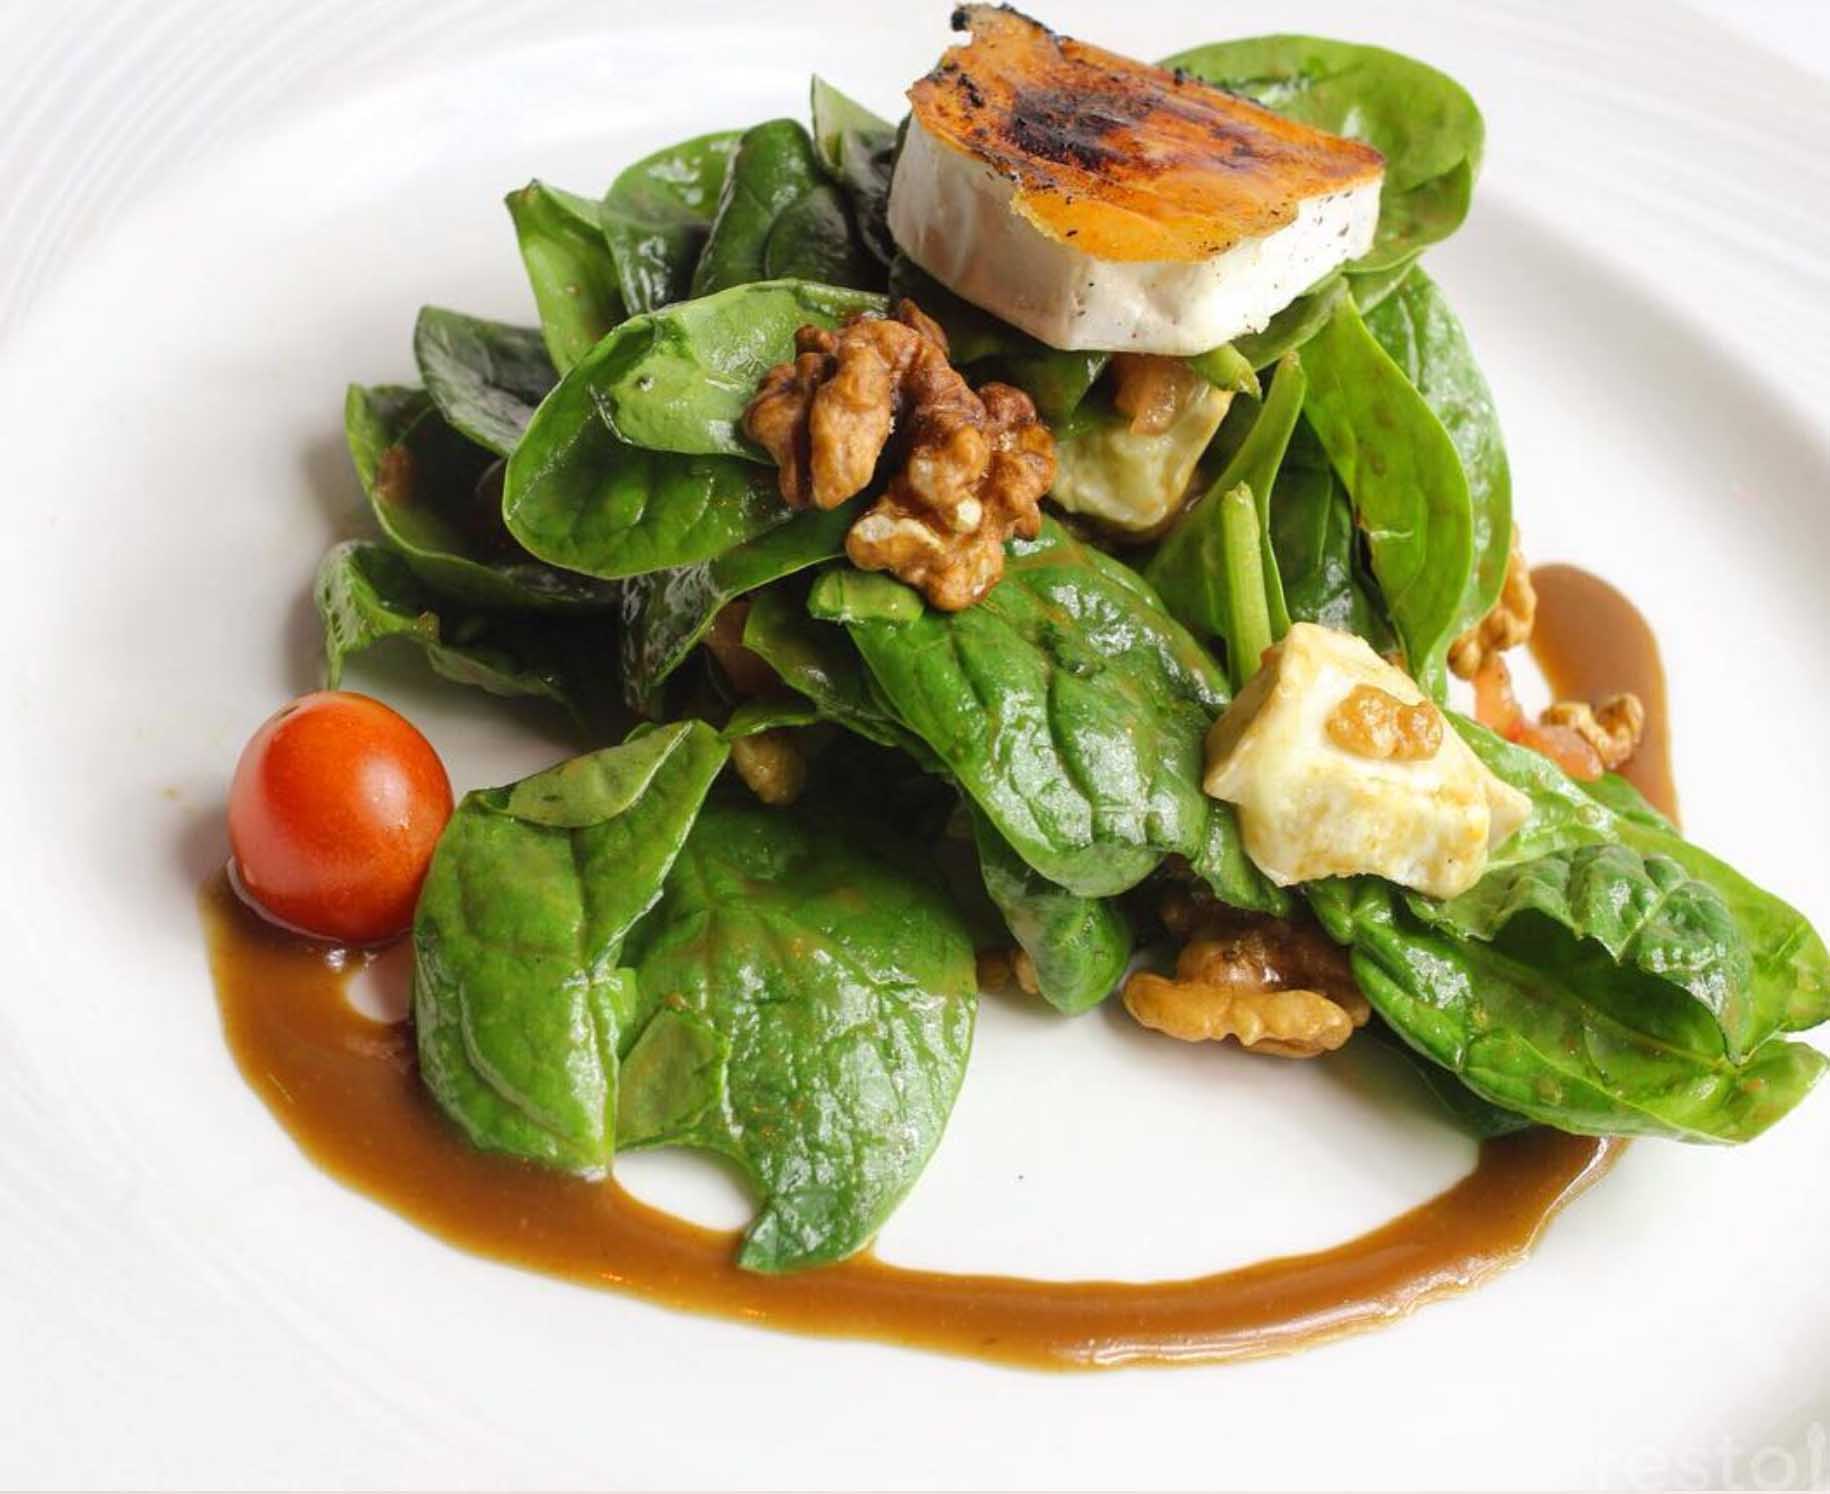 Spinach Salad with Goat Cheese, Mango Chutney and Honey and Mustard Vinaigrette